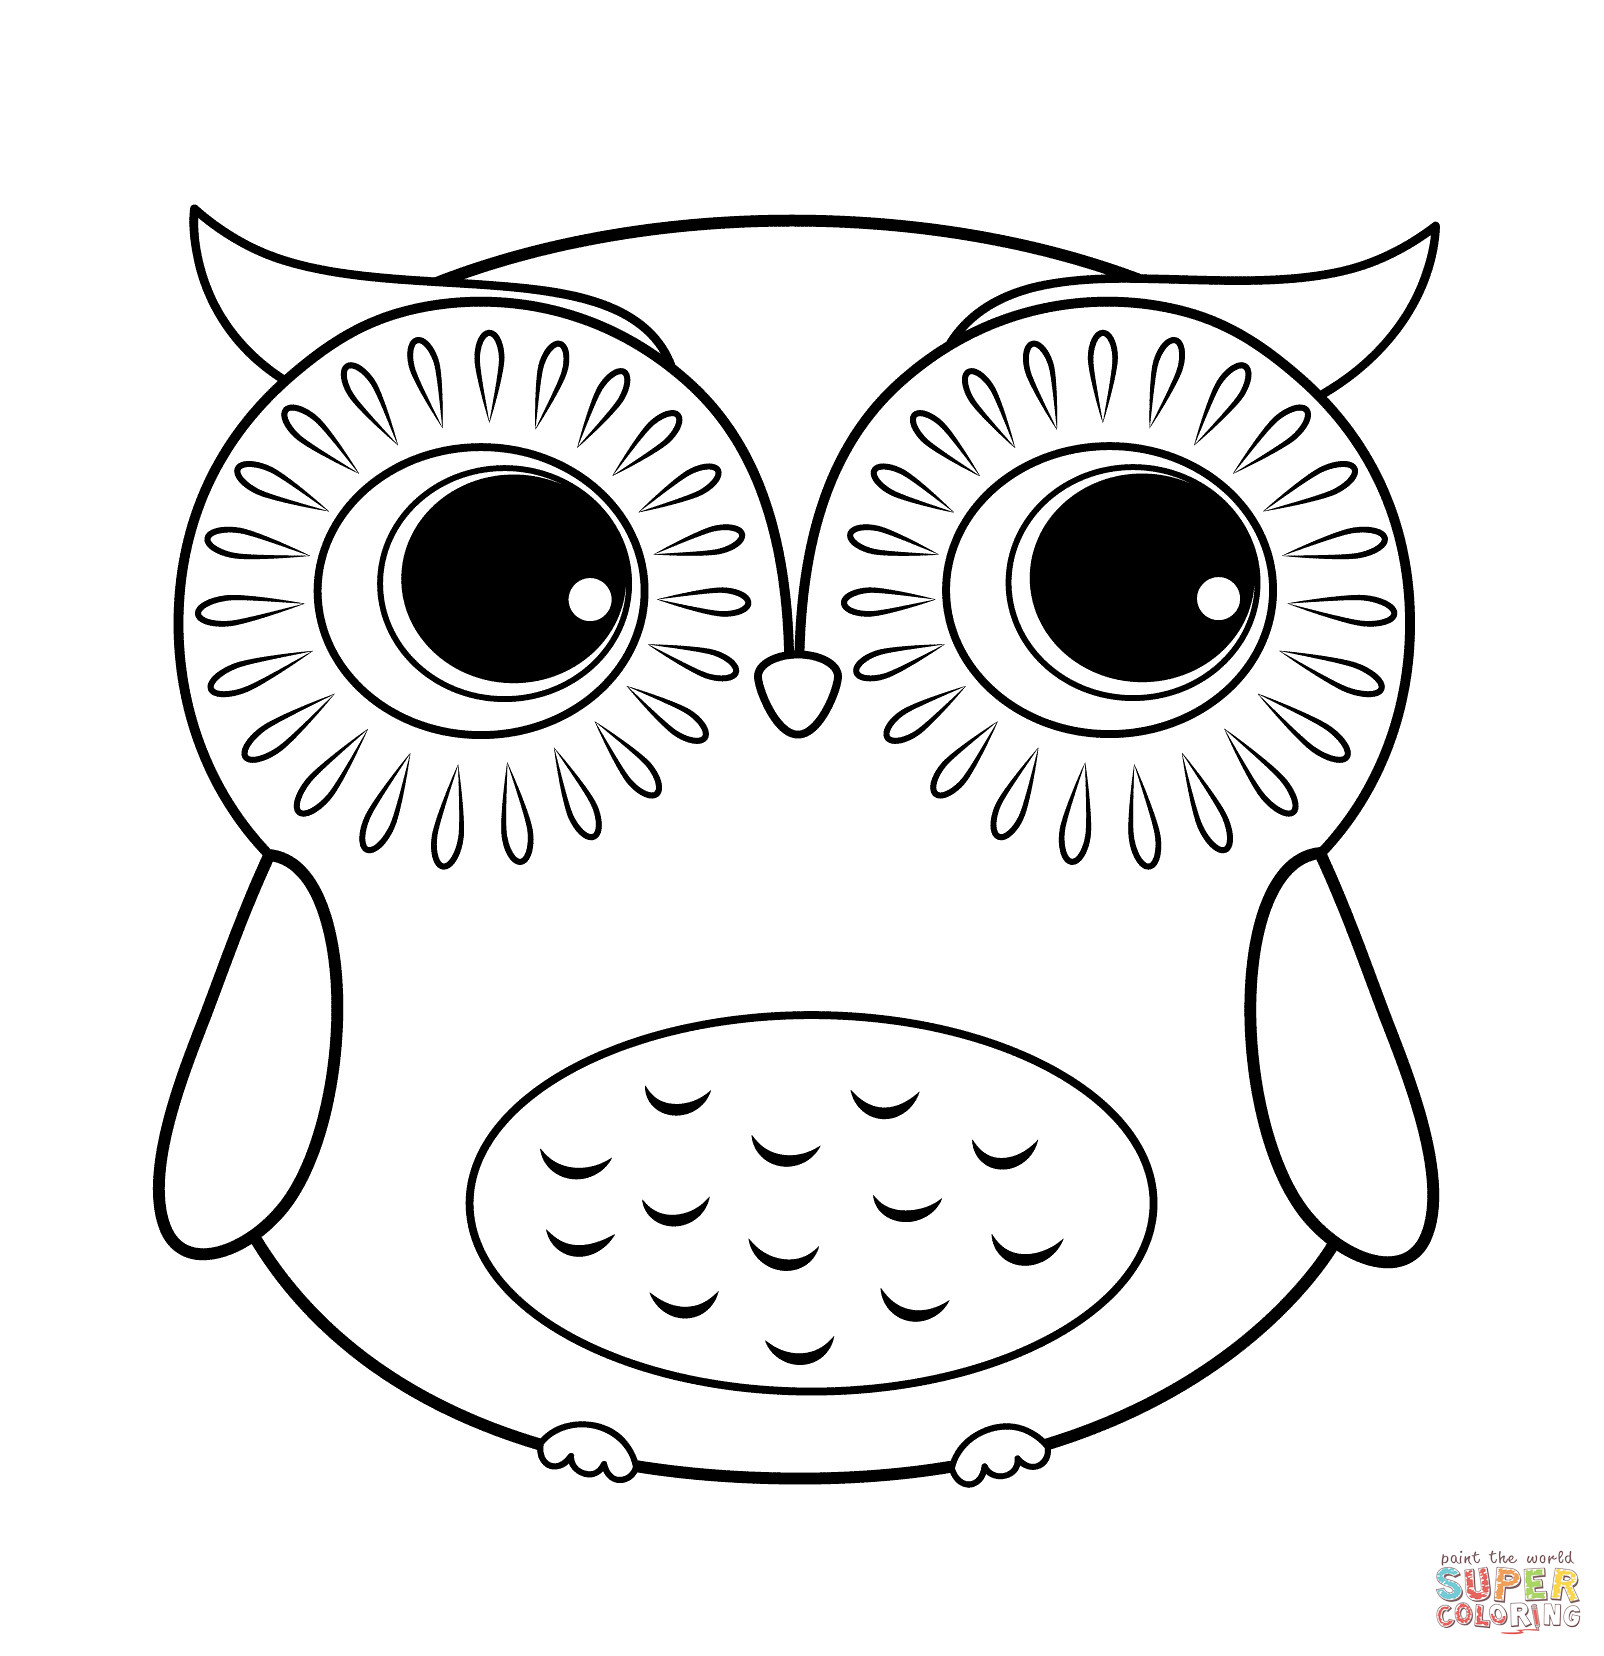 Cute Baby Owl Coloring Pages
 Cute Baby Owl Coloring Pages Coloring Home